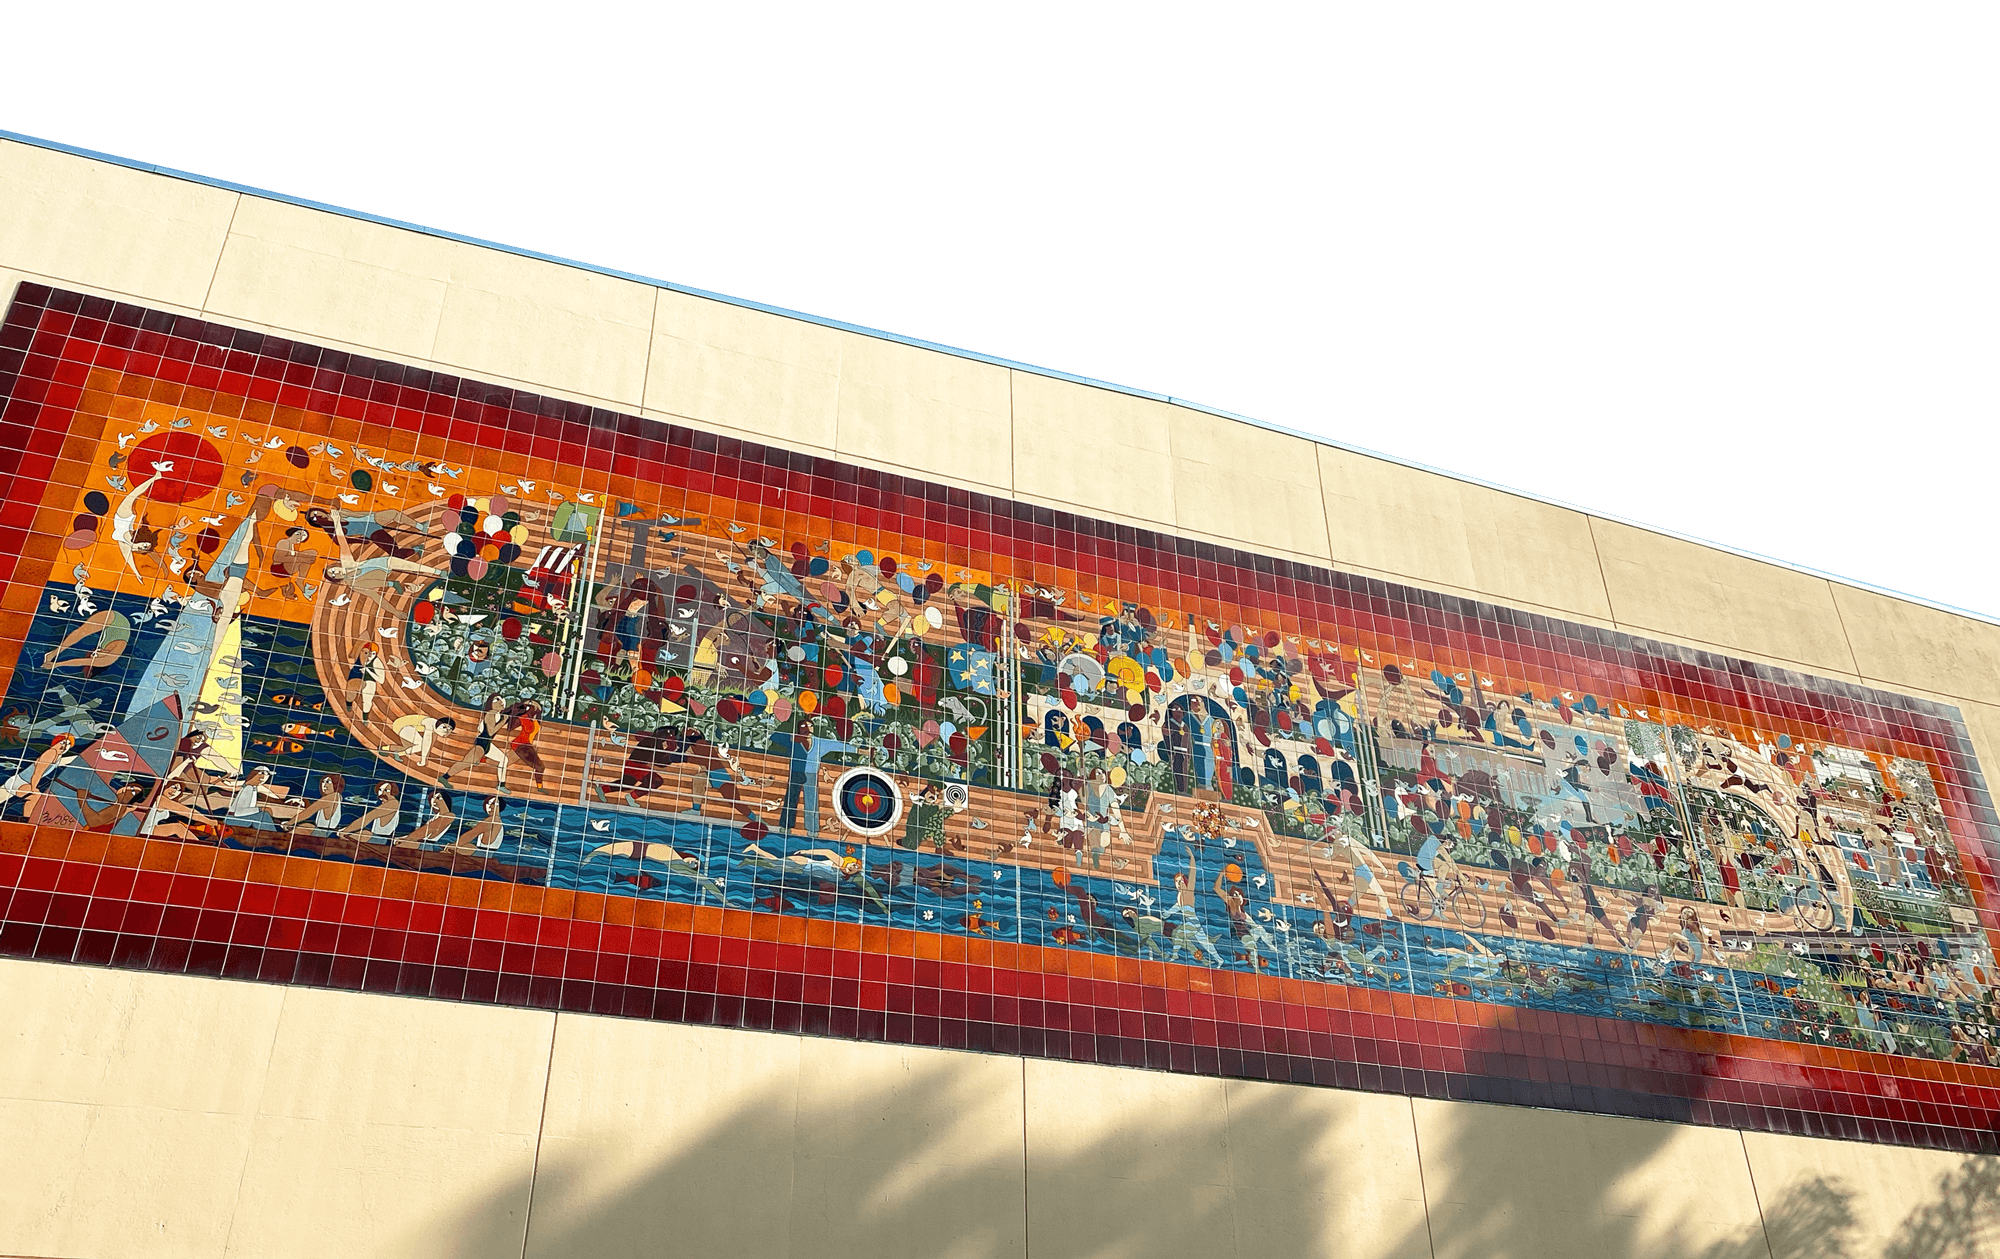 The olympic mural at Cal State LA.